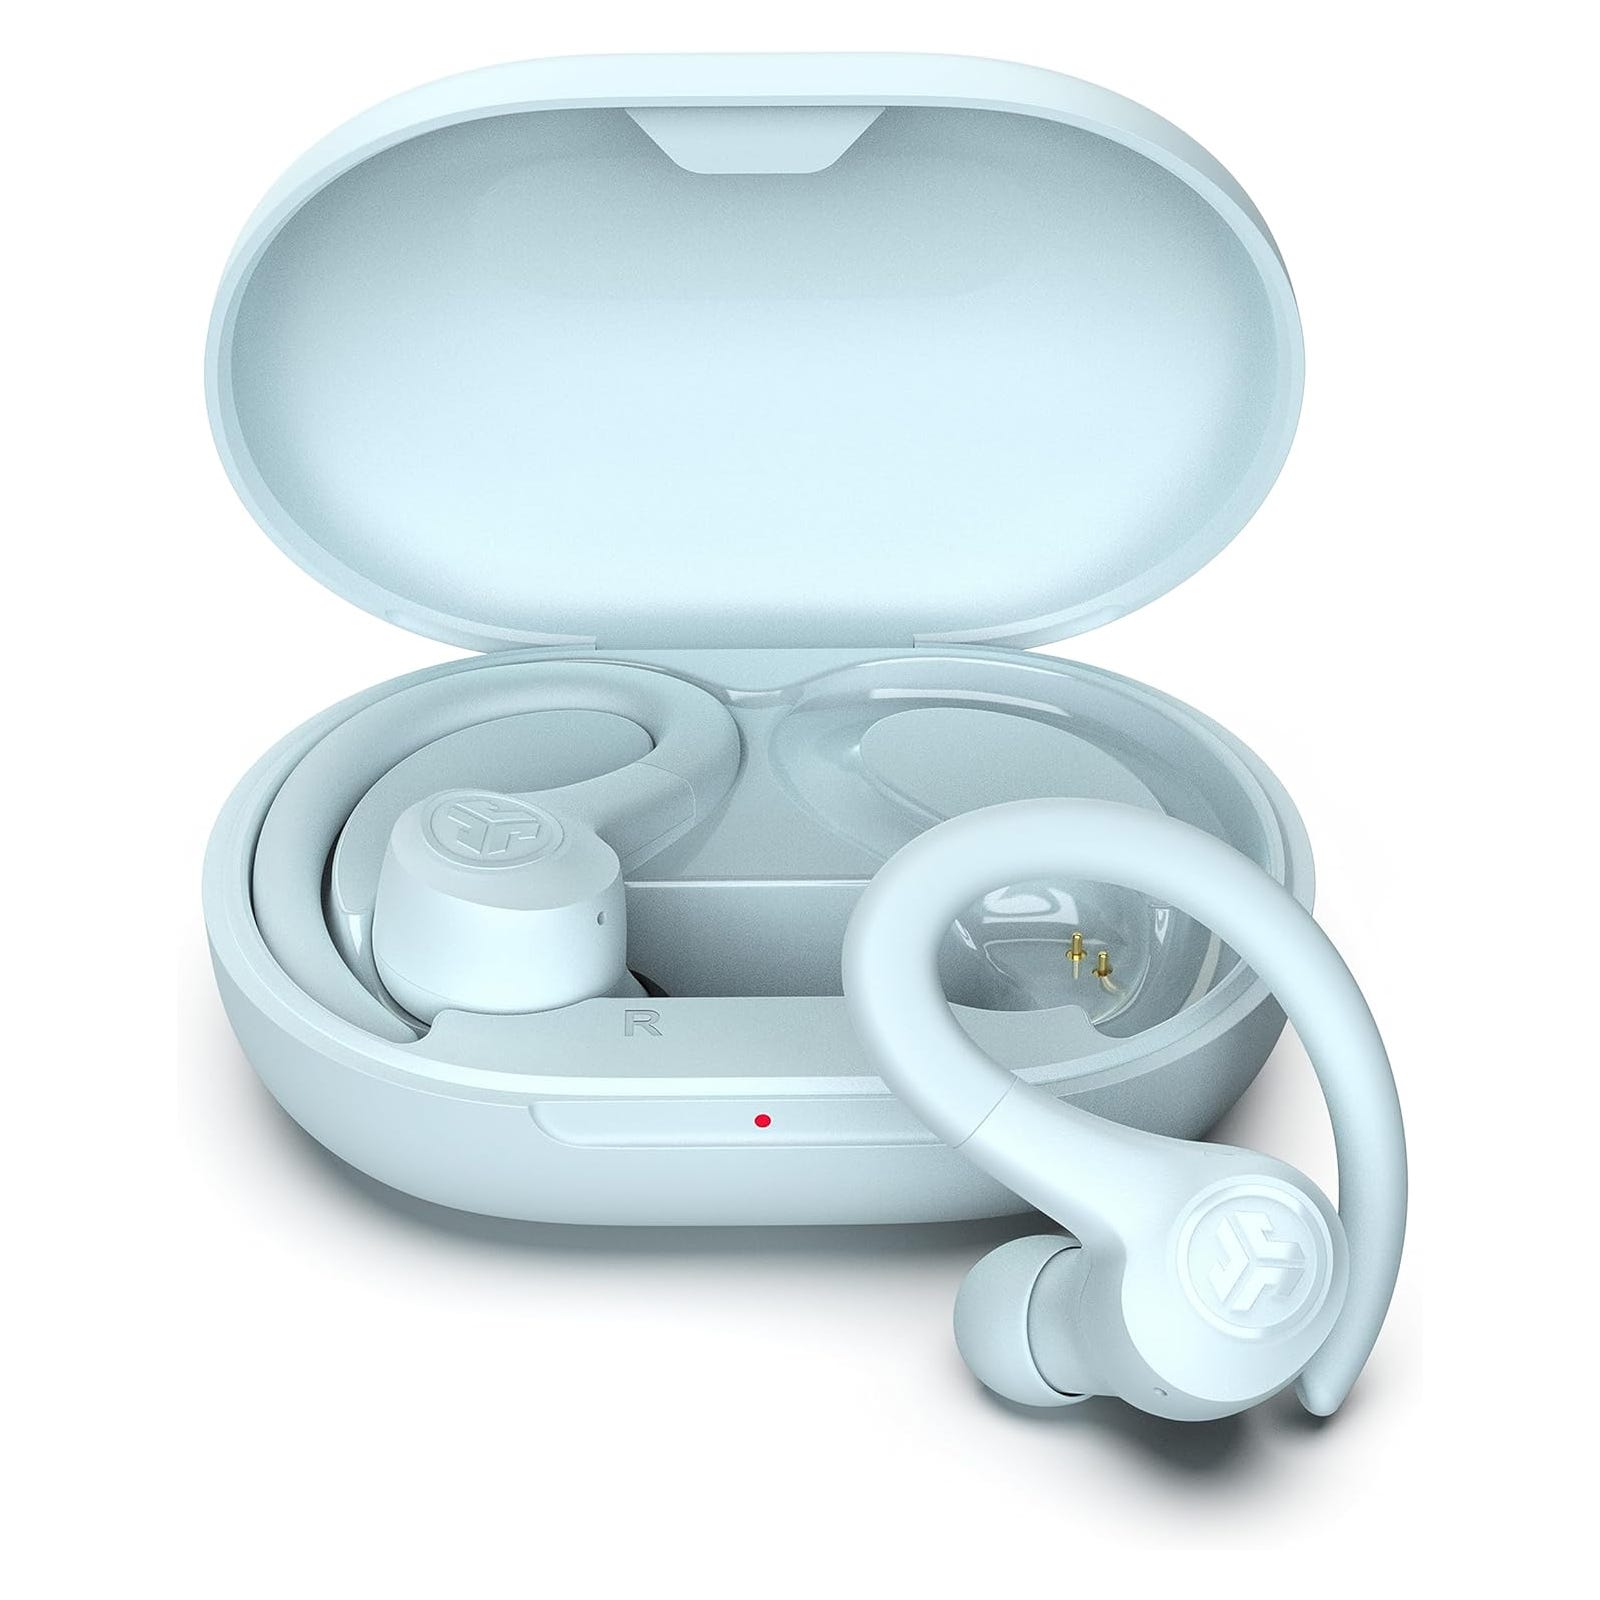 Wireless earbuds with ear hooks in a charging case.